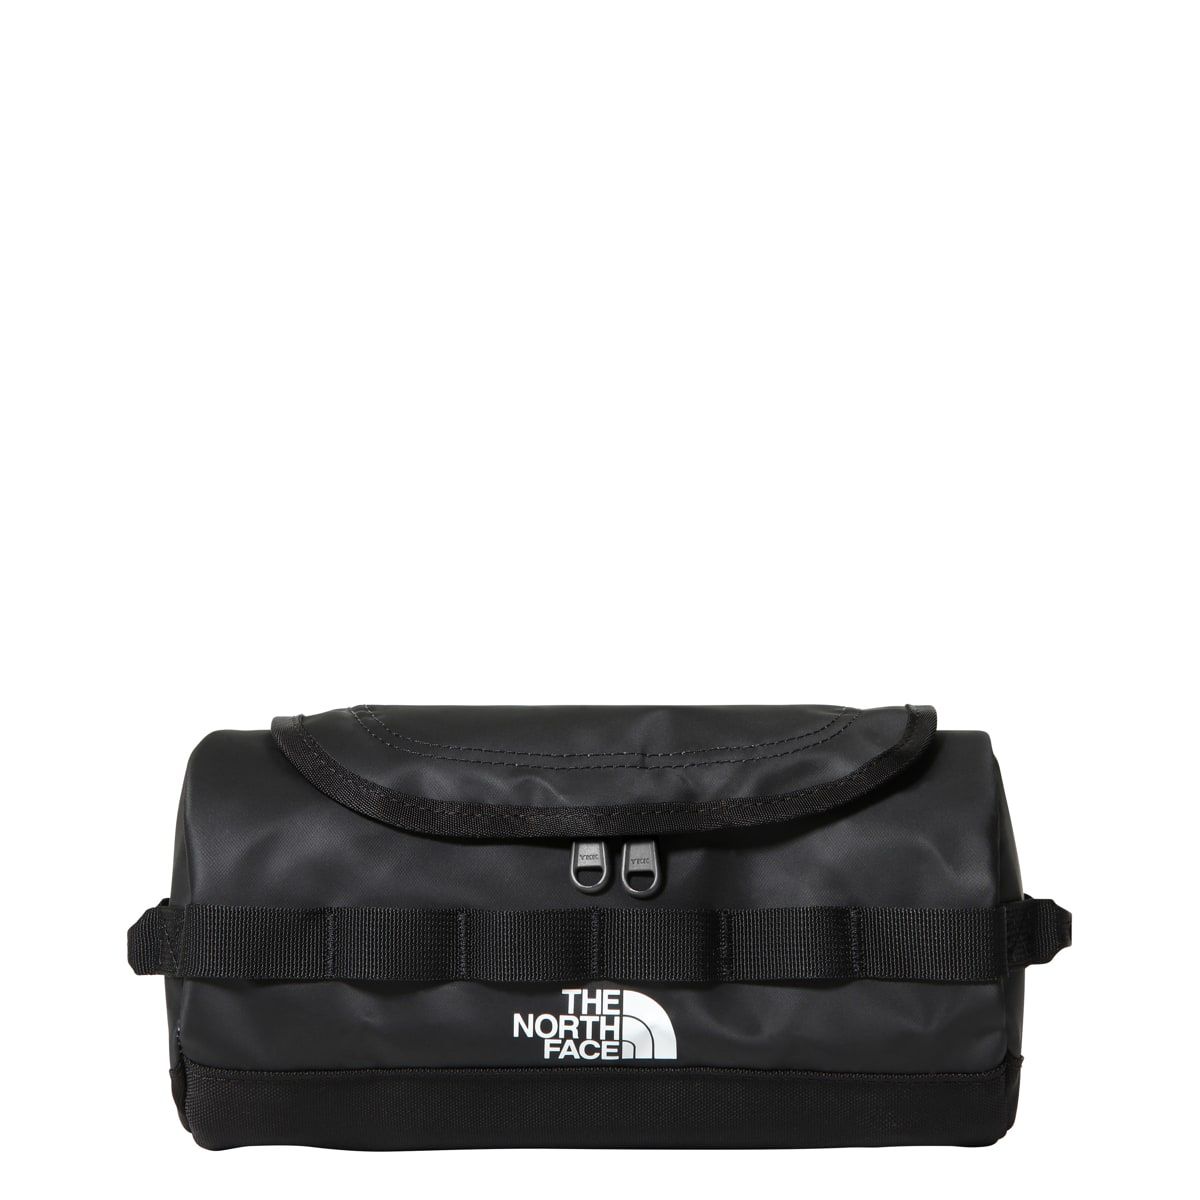 The North Face Base Camp Travel Canister - S Tnfblack/Tnfwht